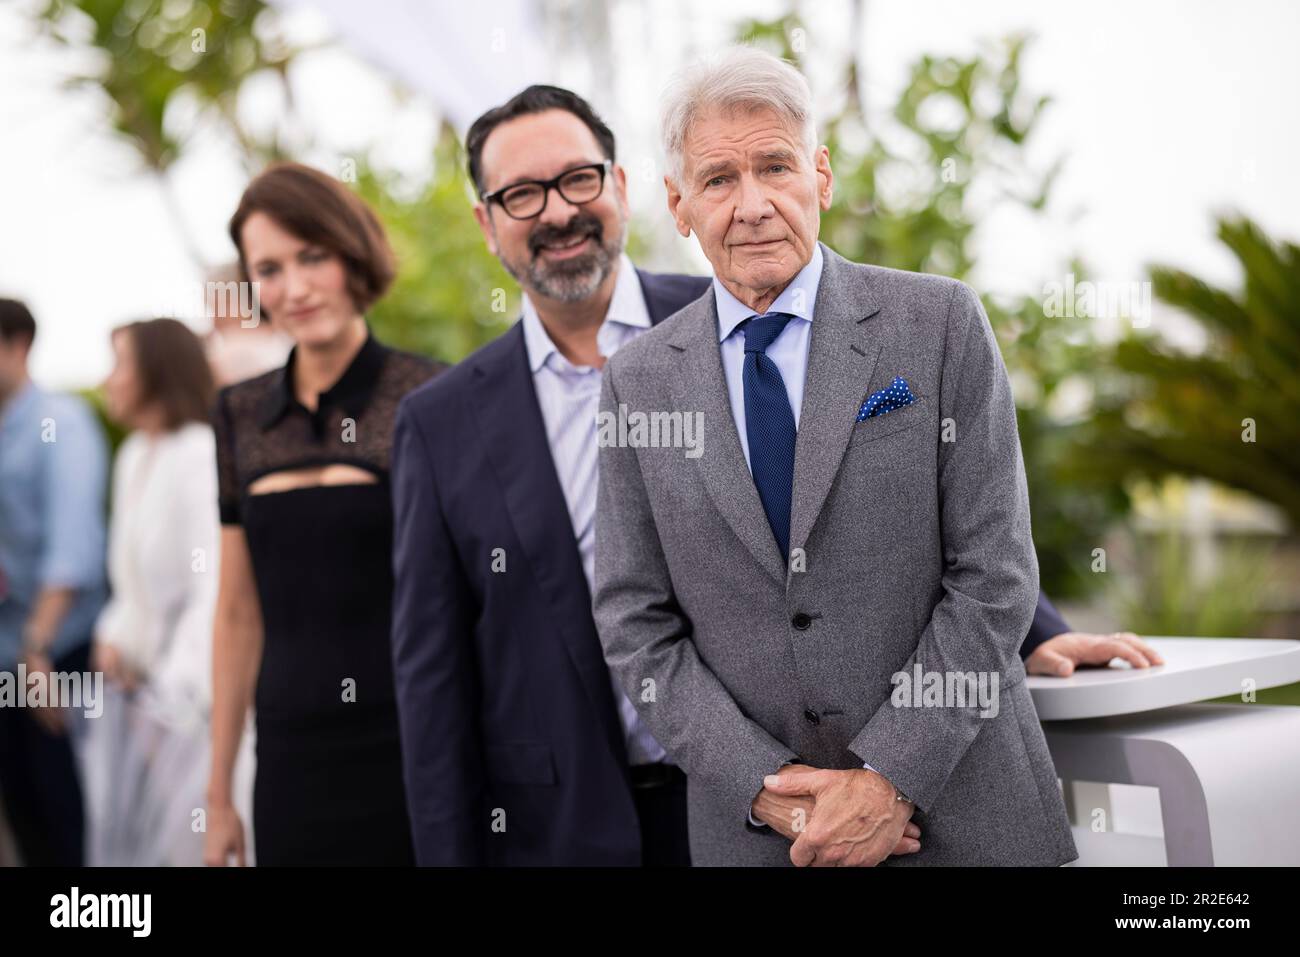 James Mangold and Harrison Ford pose for photographers at the photo call for the film 'Indiana Jones and the Dial of Destiny' at the 76th international film festival, Cannes, southern France, Friday, May 19, 2023. (Photo by Vianney Le Caer/Invision/AP) Stock Photo